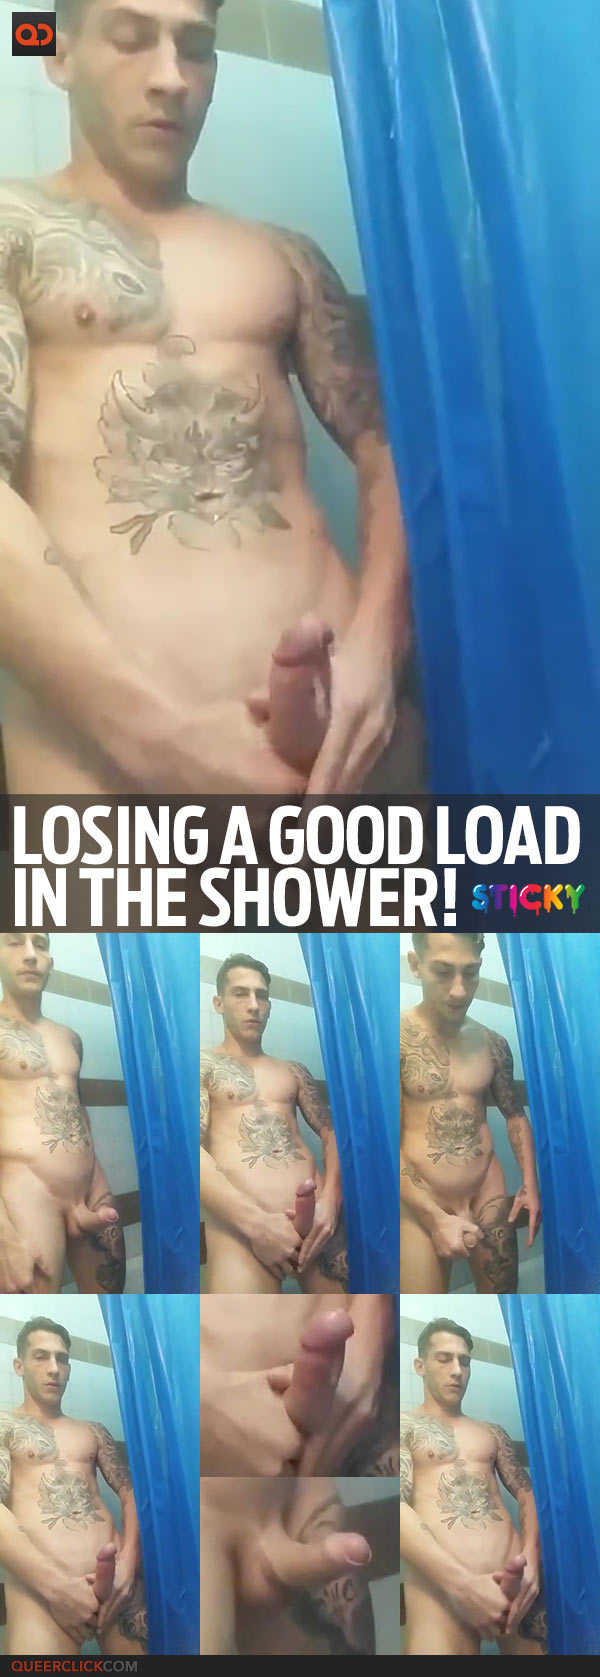 Loosing A Good Load In The Shower!